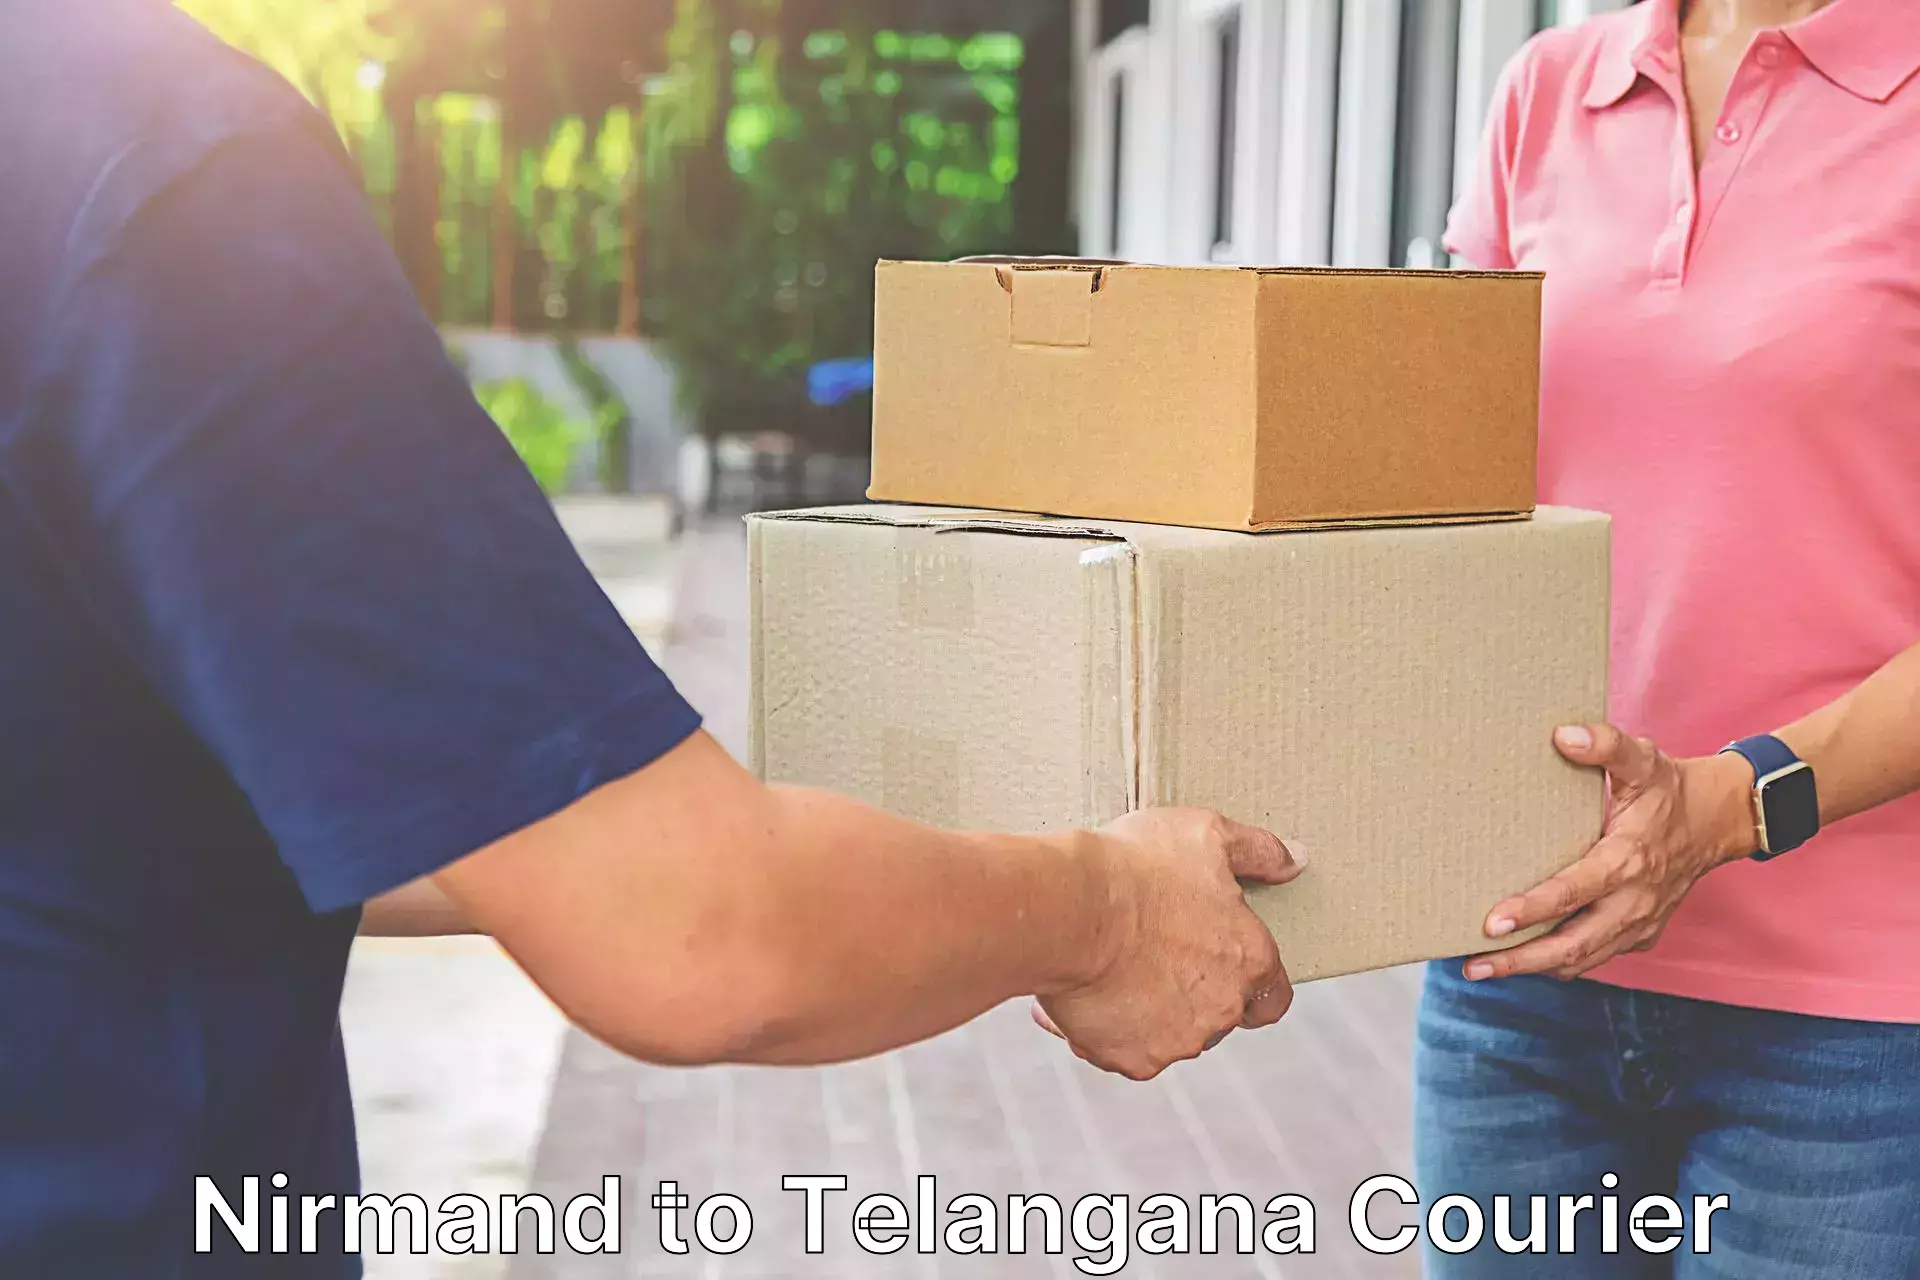 Reliable logistics providers Nirmand to Sultanabad